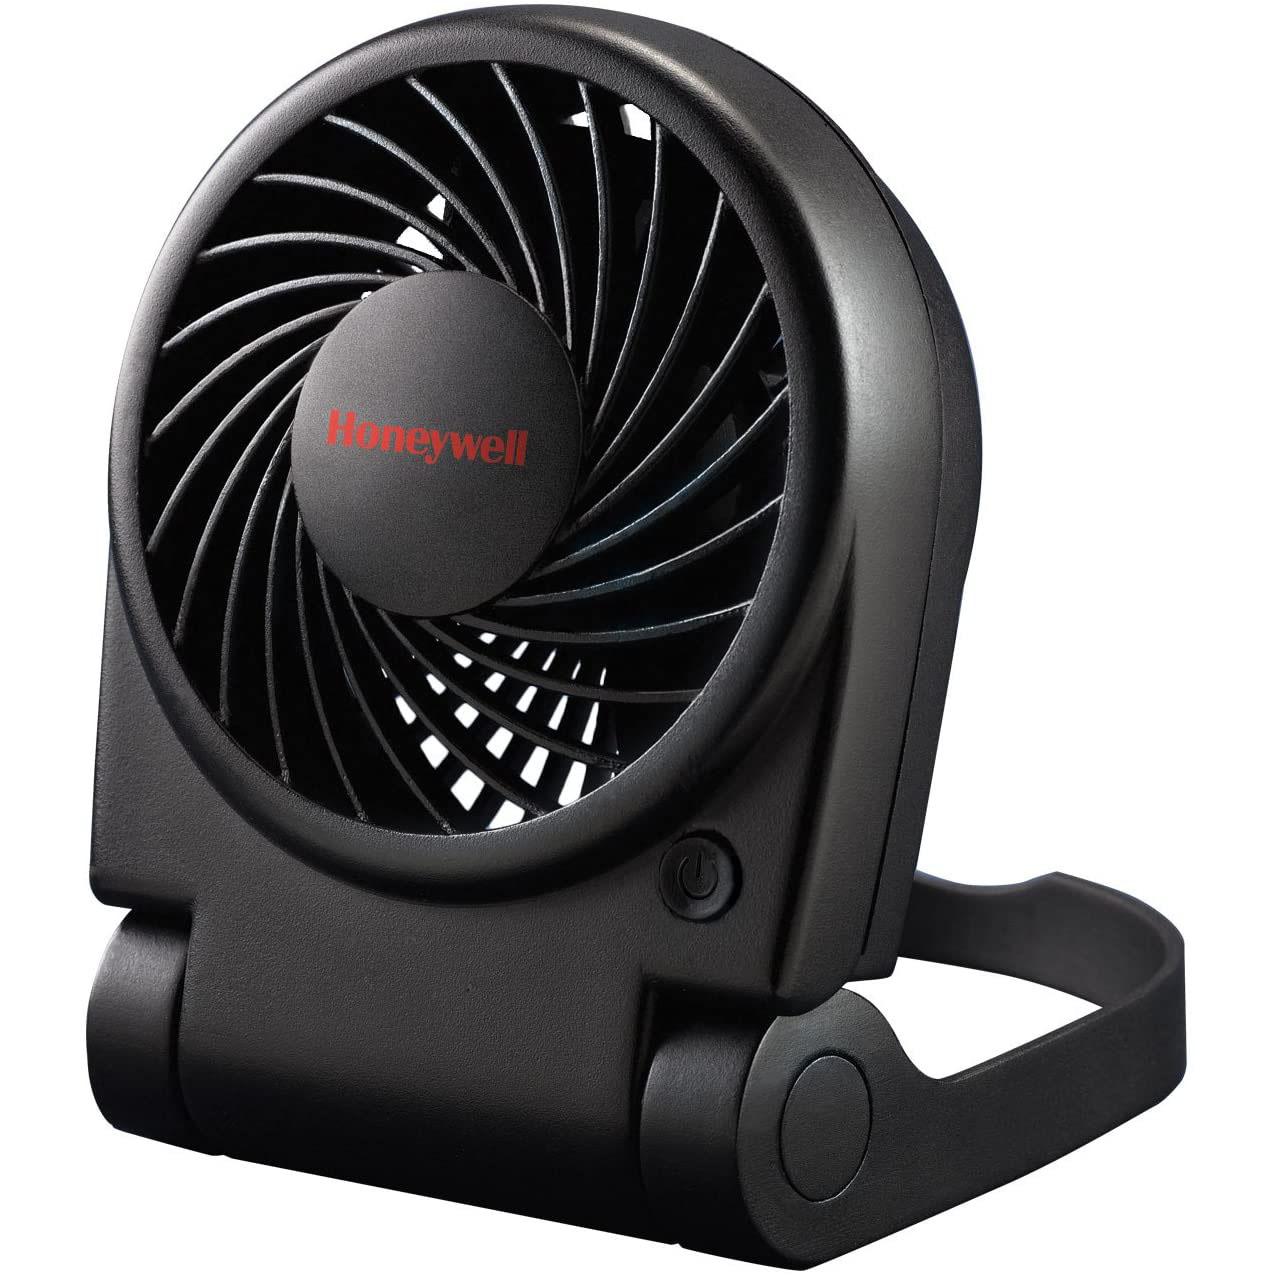 Honeywell Turbo on the Go Personal Fan for $8.39